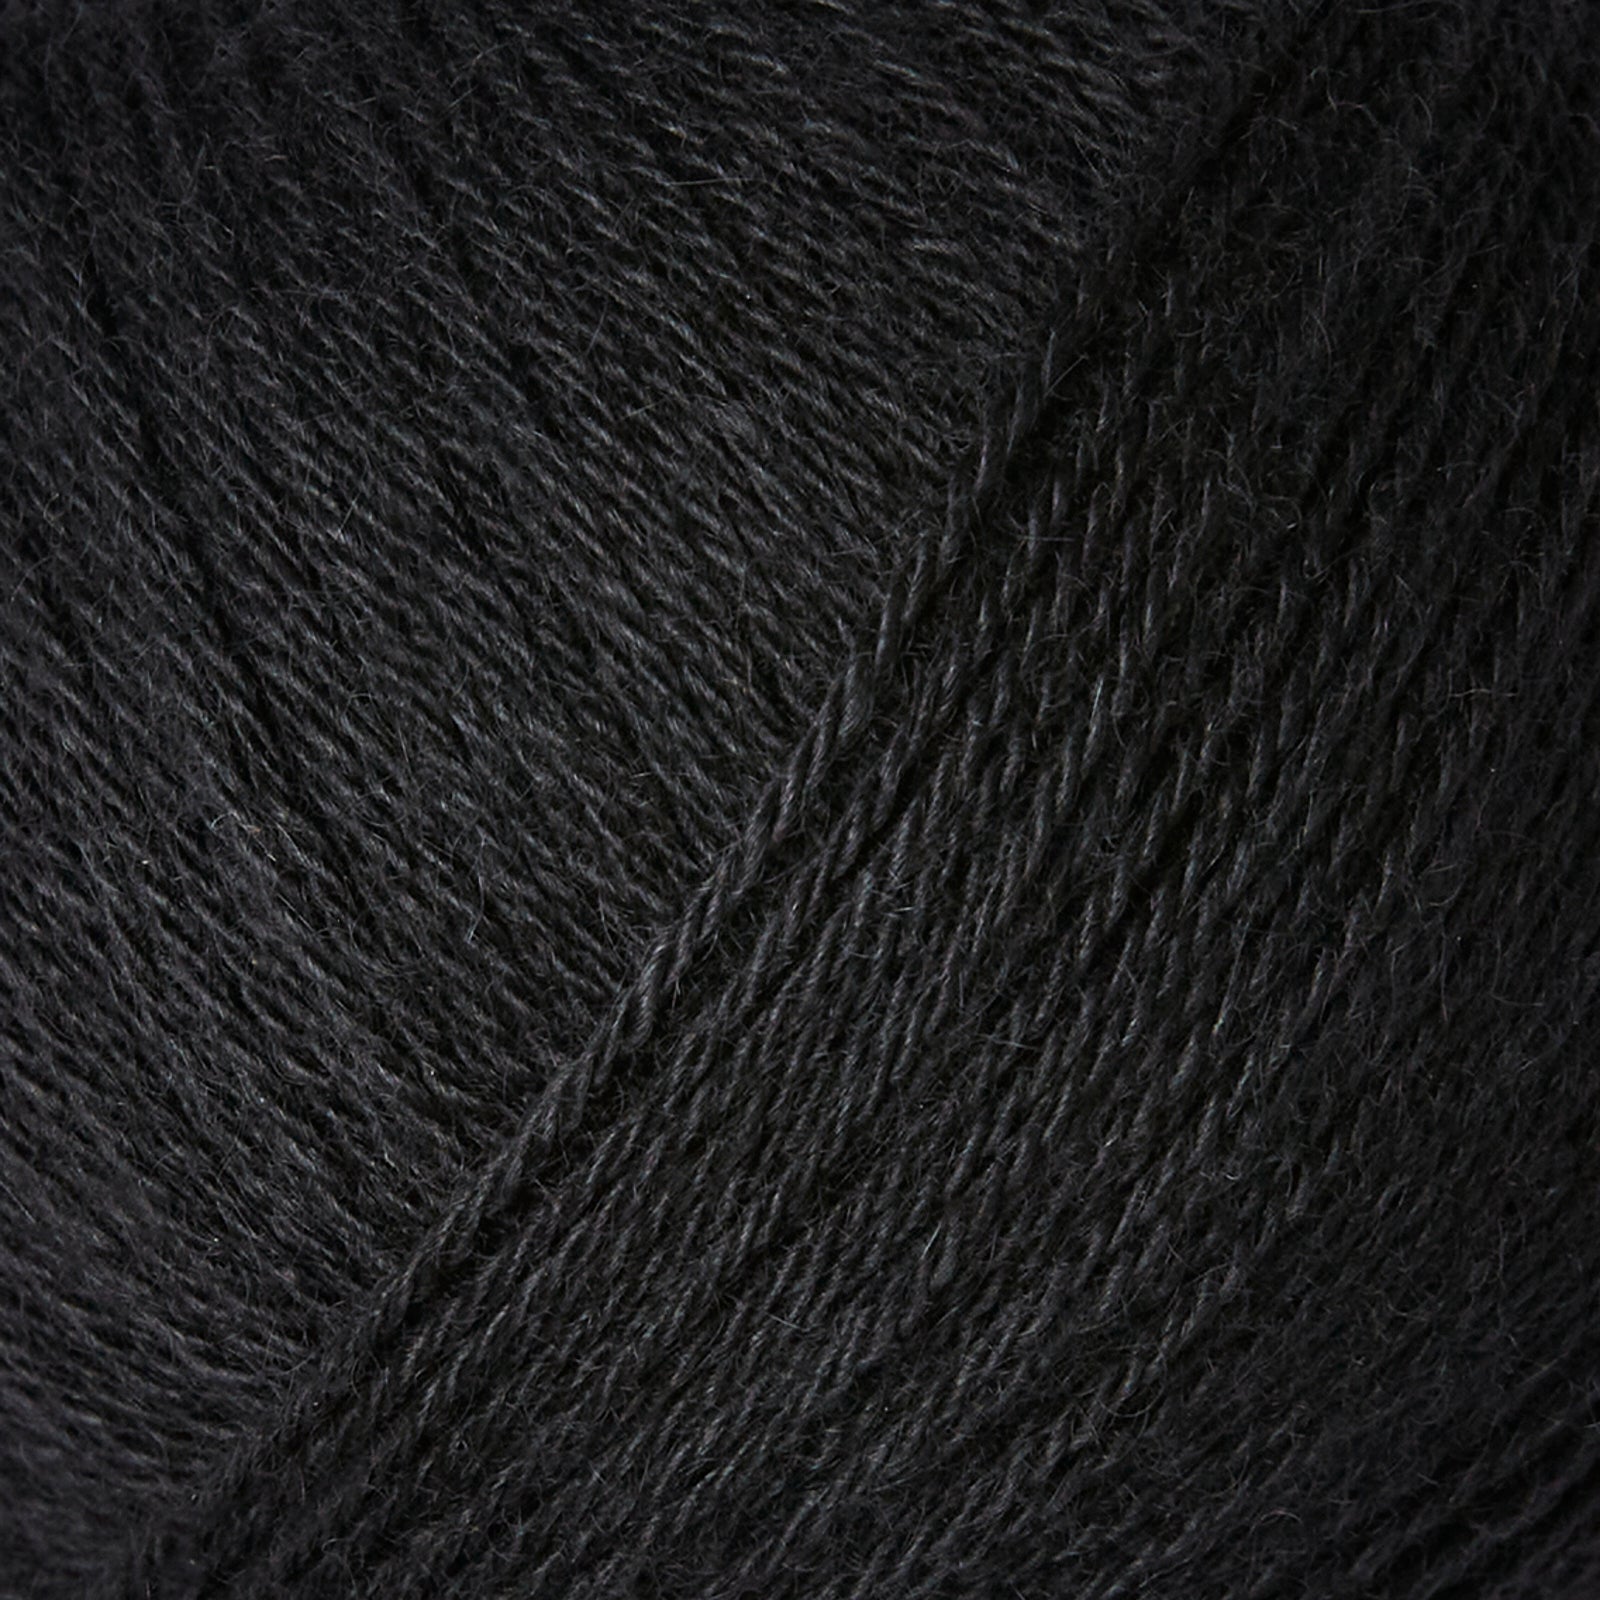 Knitting for Olive Compatible Cashmere - Licorice